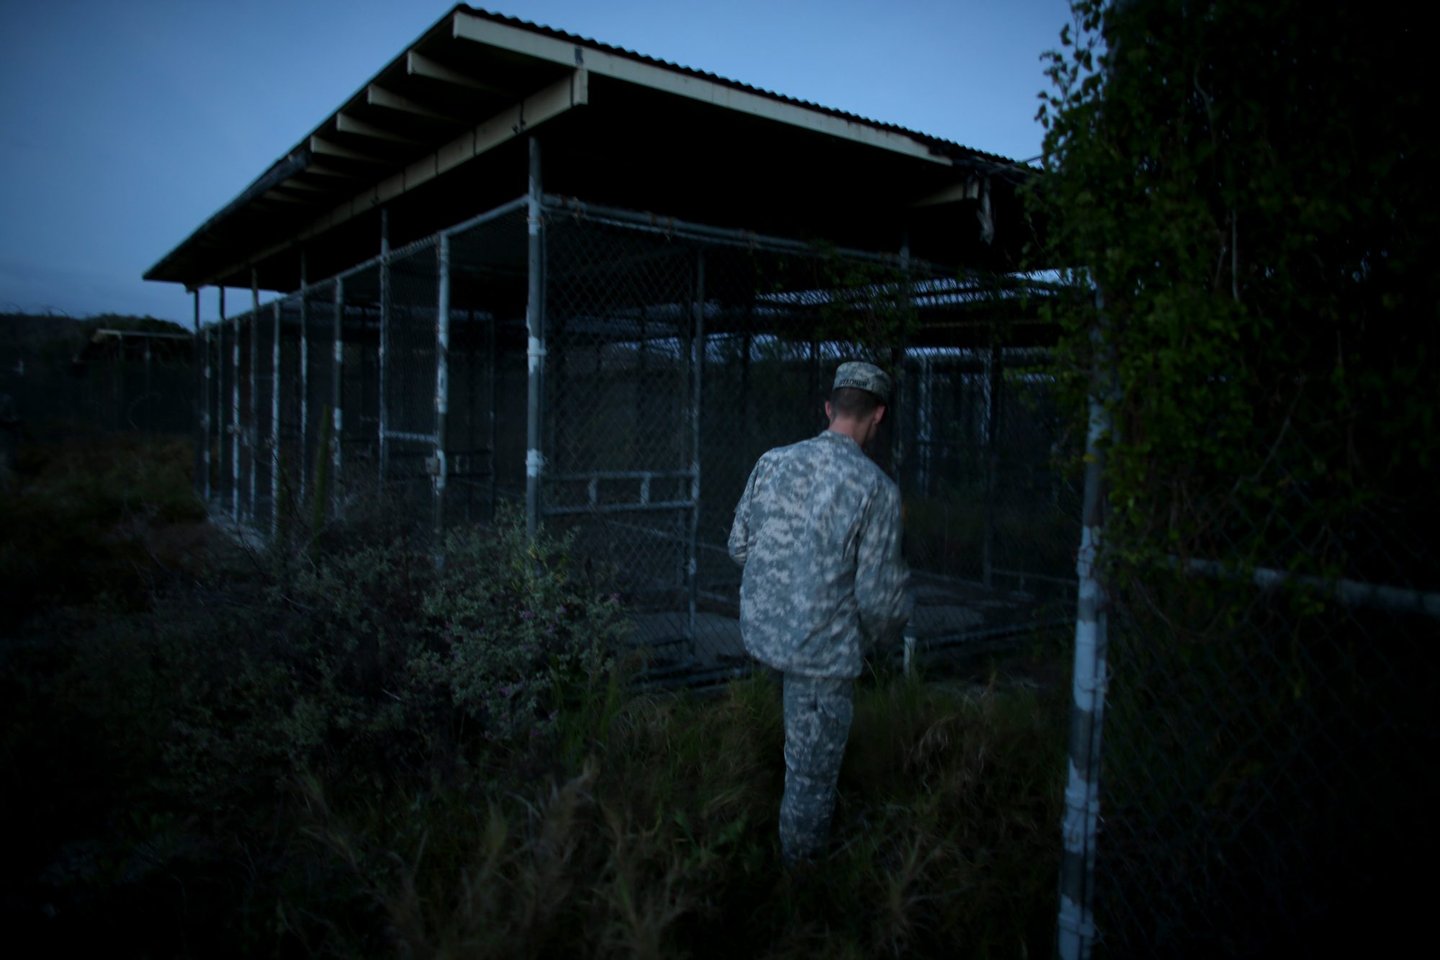 GUANTANAMO BAY, CUBA - JUNE 27: (EDITORS NOTE: Image has been reviewed by the U.S. Military prior to transmission.) A Public Affairs Officer escorts media through the currently closed Camp X-Ray which was the first detention facility to hold 'enemy combatants' at the U.S. Naval Station on June 27, 2013 in Guantanamo Bay, Cuba.The U.S. Naval Station at Guantanamo Bay, houses the American detention center for 'enemy combatants'. President Barack Obama has recently spoken again about closing the prison which has been used to hold prisoners from the invasion of Afghanistan and the war on terror since early 2002. (Photo by Joe Raedle/Getty Images)